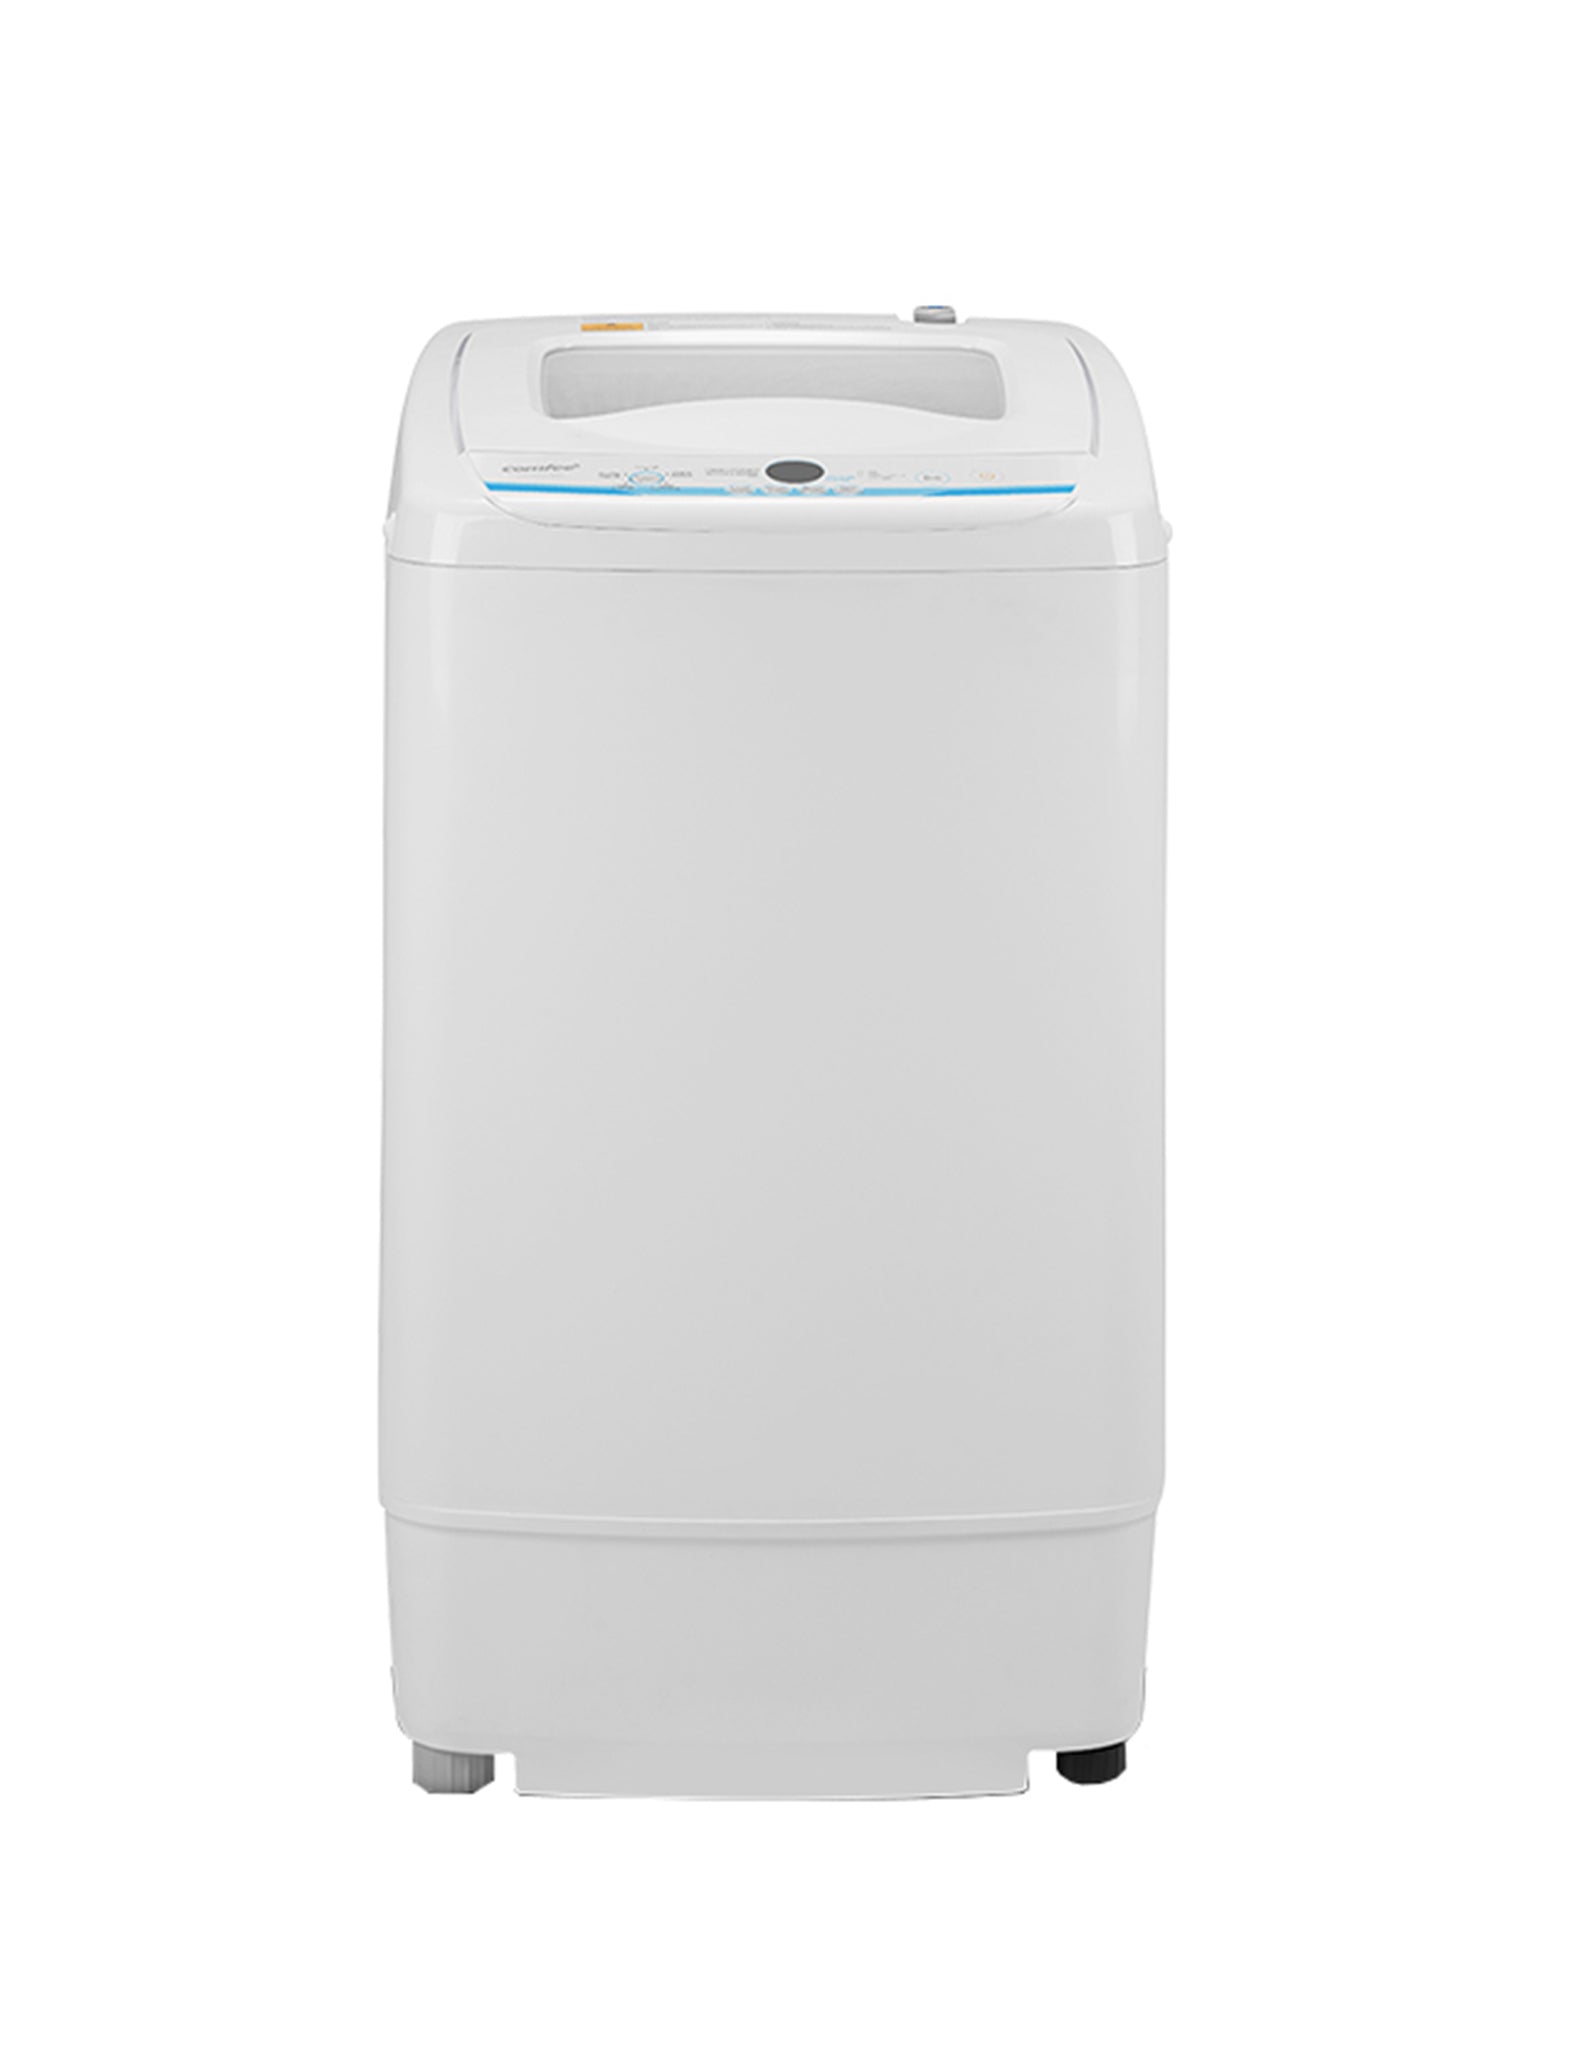 COMFEE' Portable Washing Machine, 0.9 Cu.ft Compact Washer With LED  Display, 5 Wash Cycles, 2 Built-in Rollers, Space Saving Full-Automatic  Washer